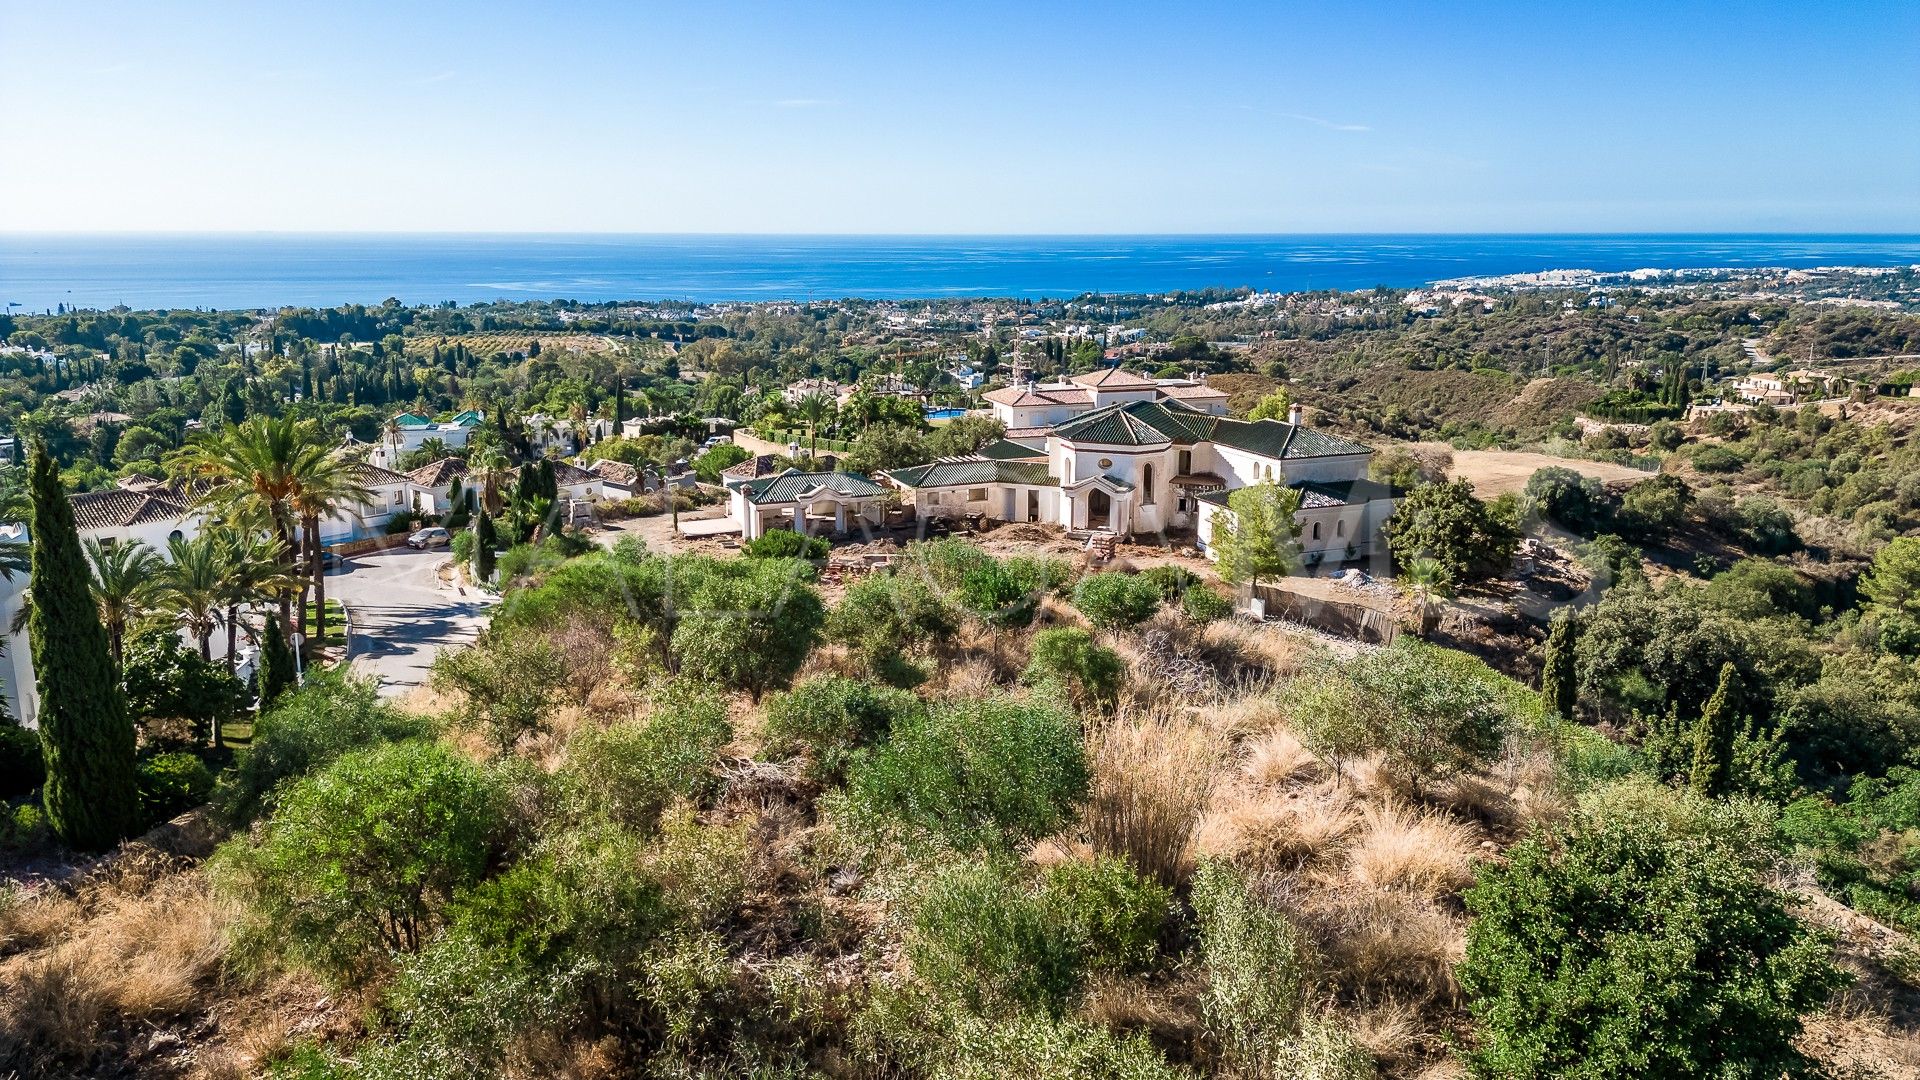 Tomt for sale in Marbella Hill Club